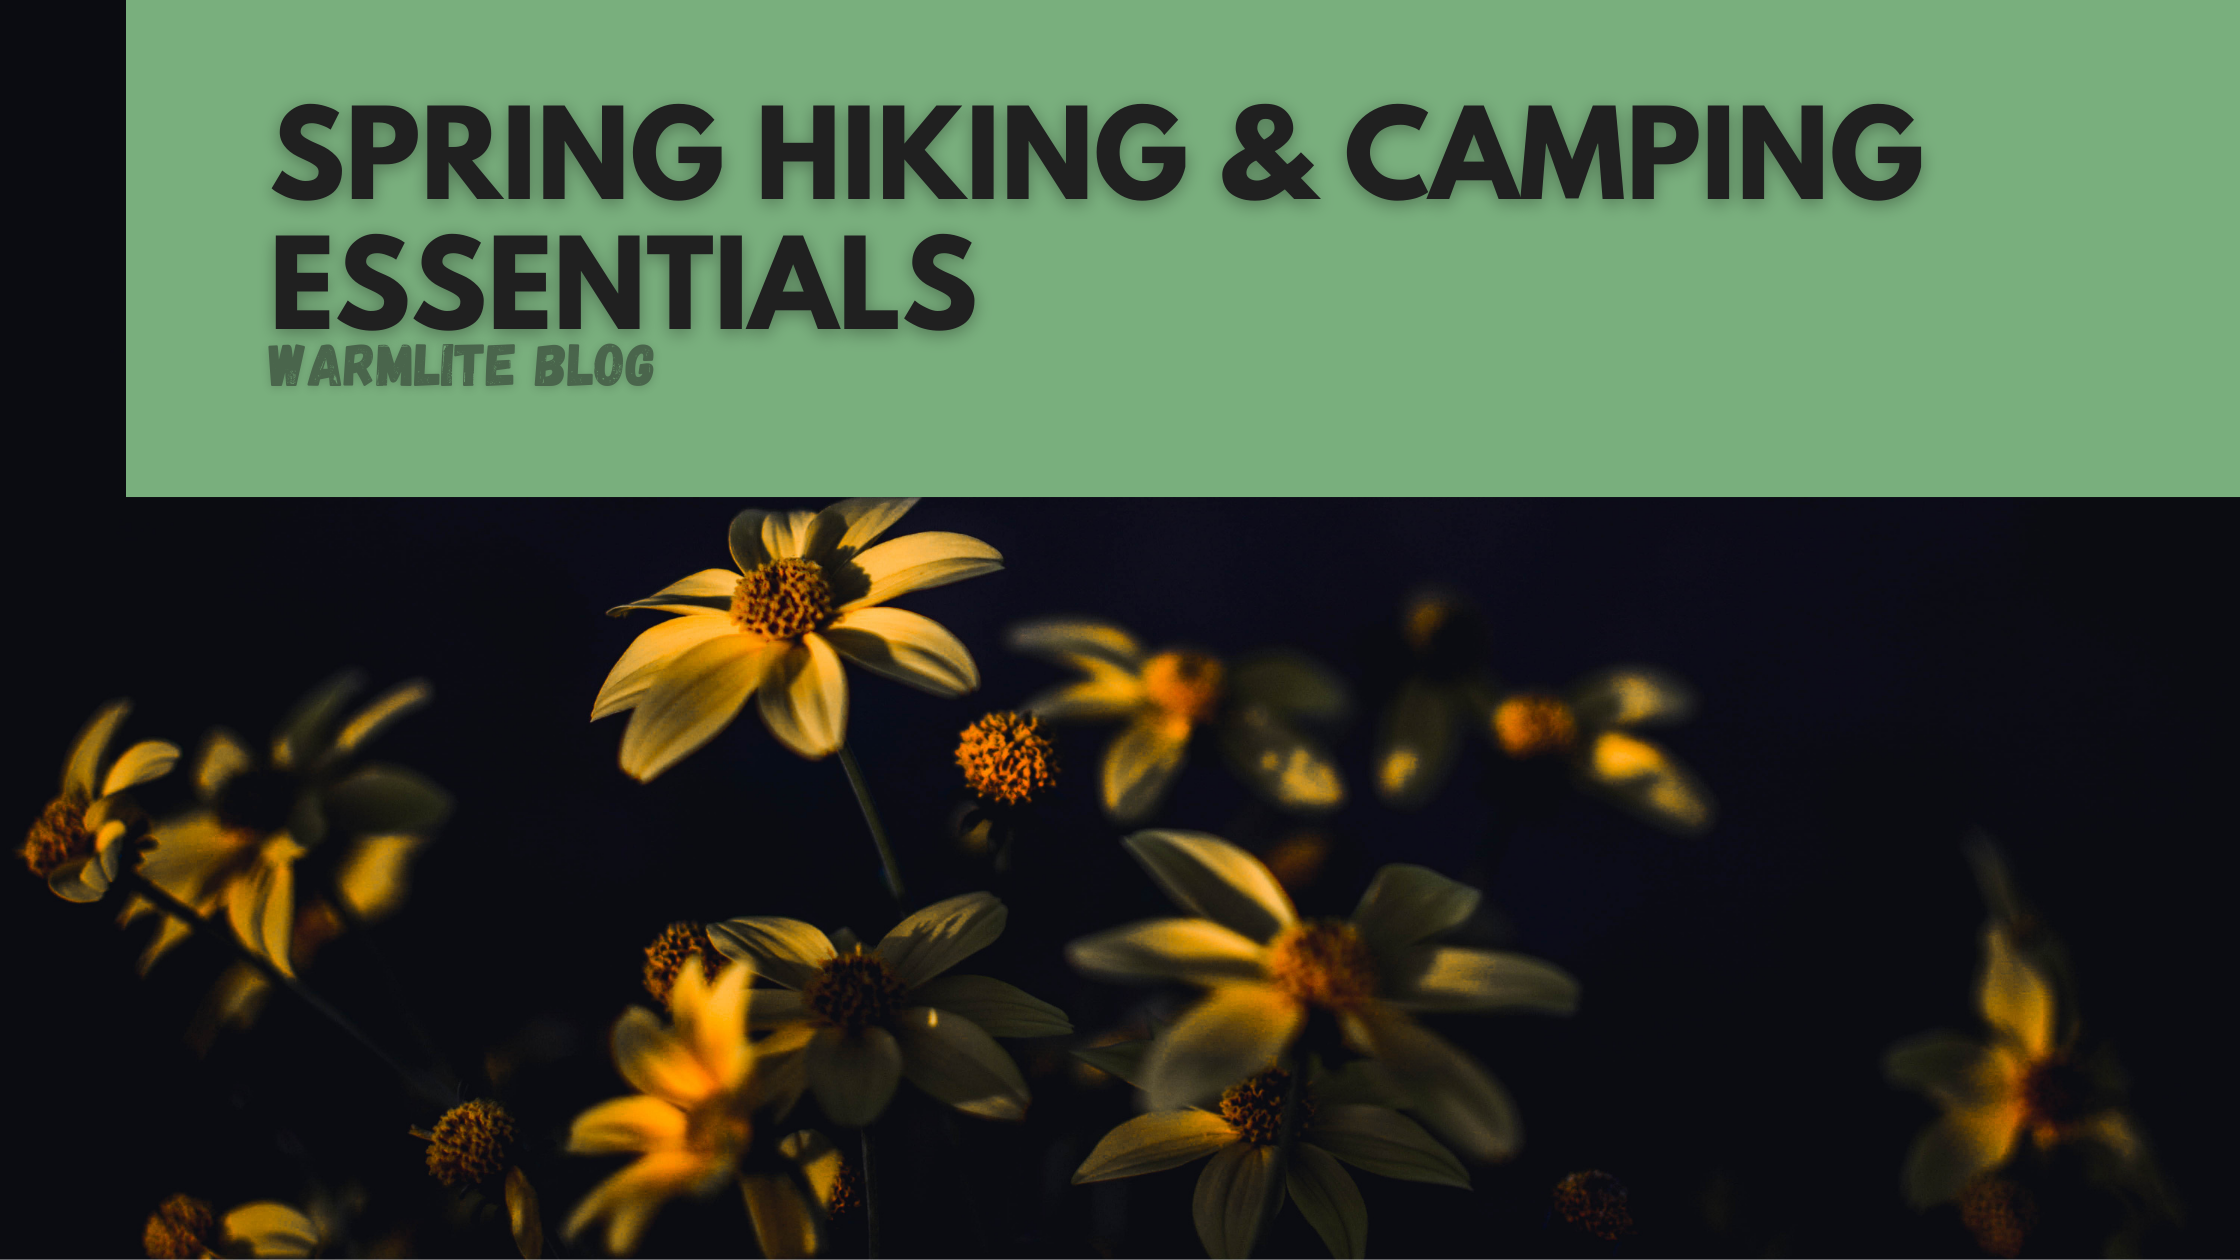 Spring Hiking & Camping Essentials